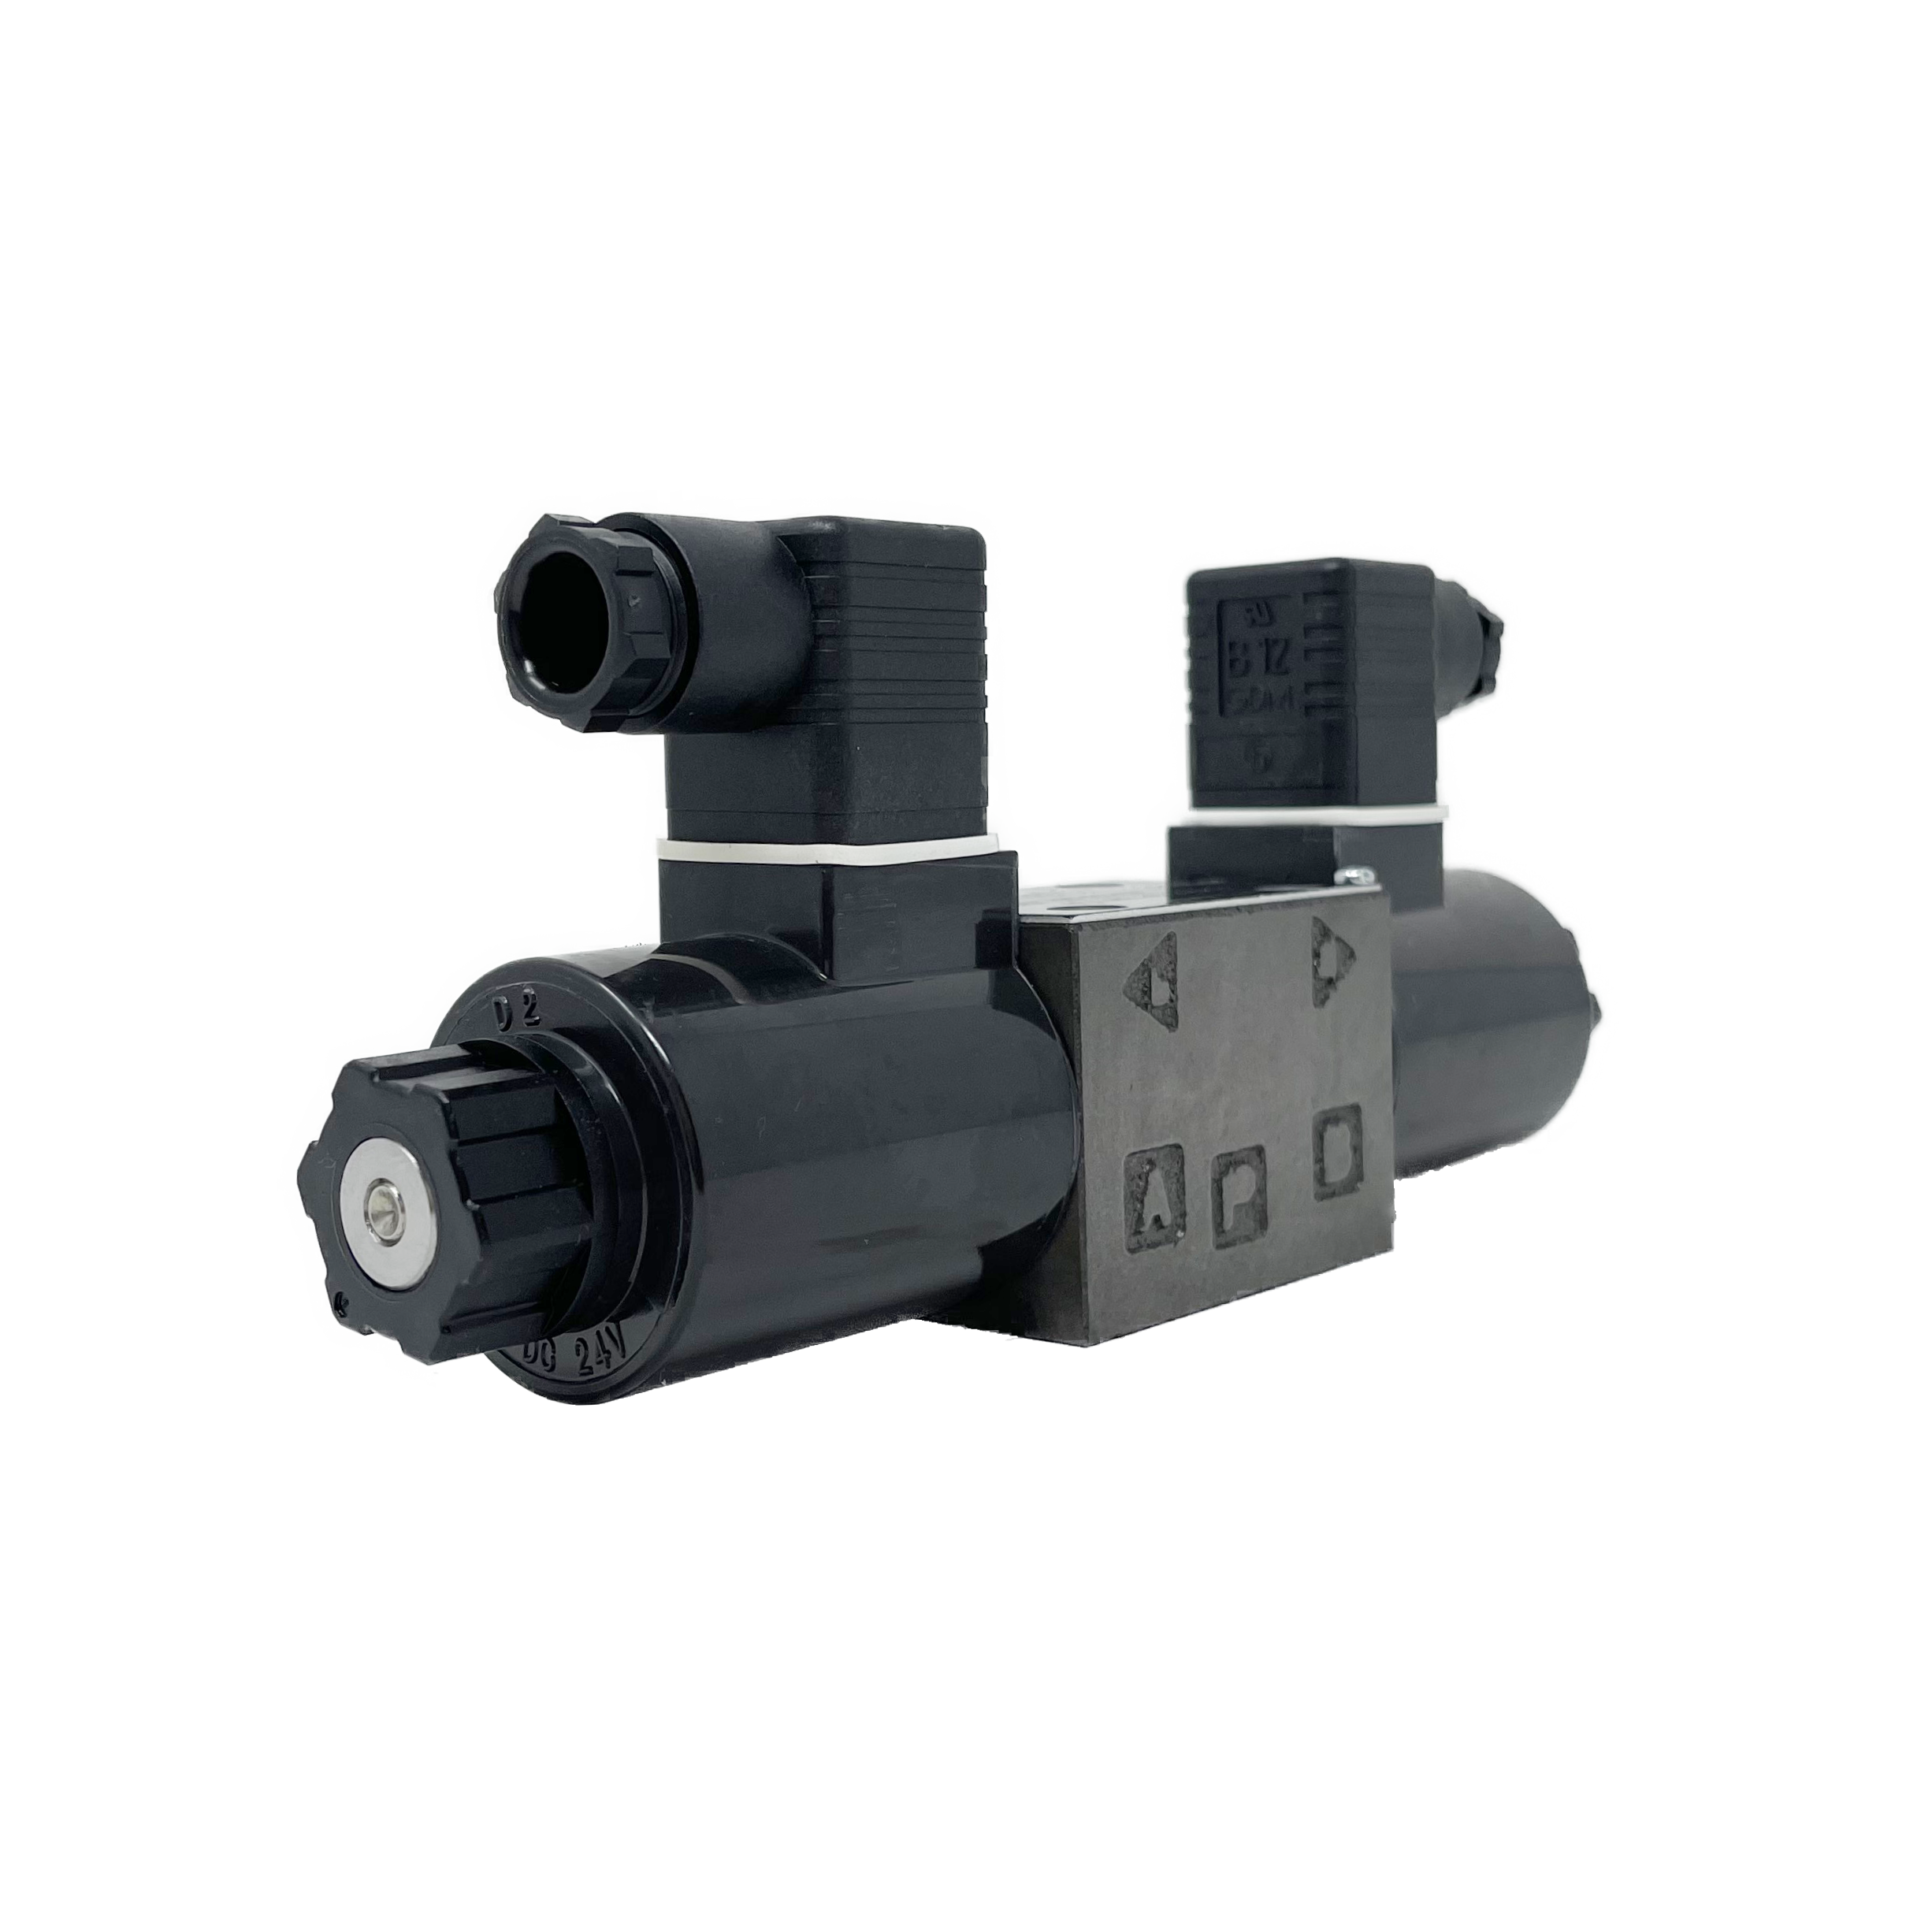 SA-G01-C6-E115-E31 : Nachi Solenoid Valve, 3P4W, D03 (NG6), D03 (NG6), 26.4GPM, 5075psi, P Blocked, A&B to T in Neutral, 120 VAC, DIN with Built-in Rectifier, Spring Centered